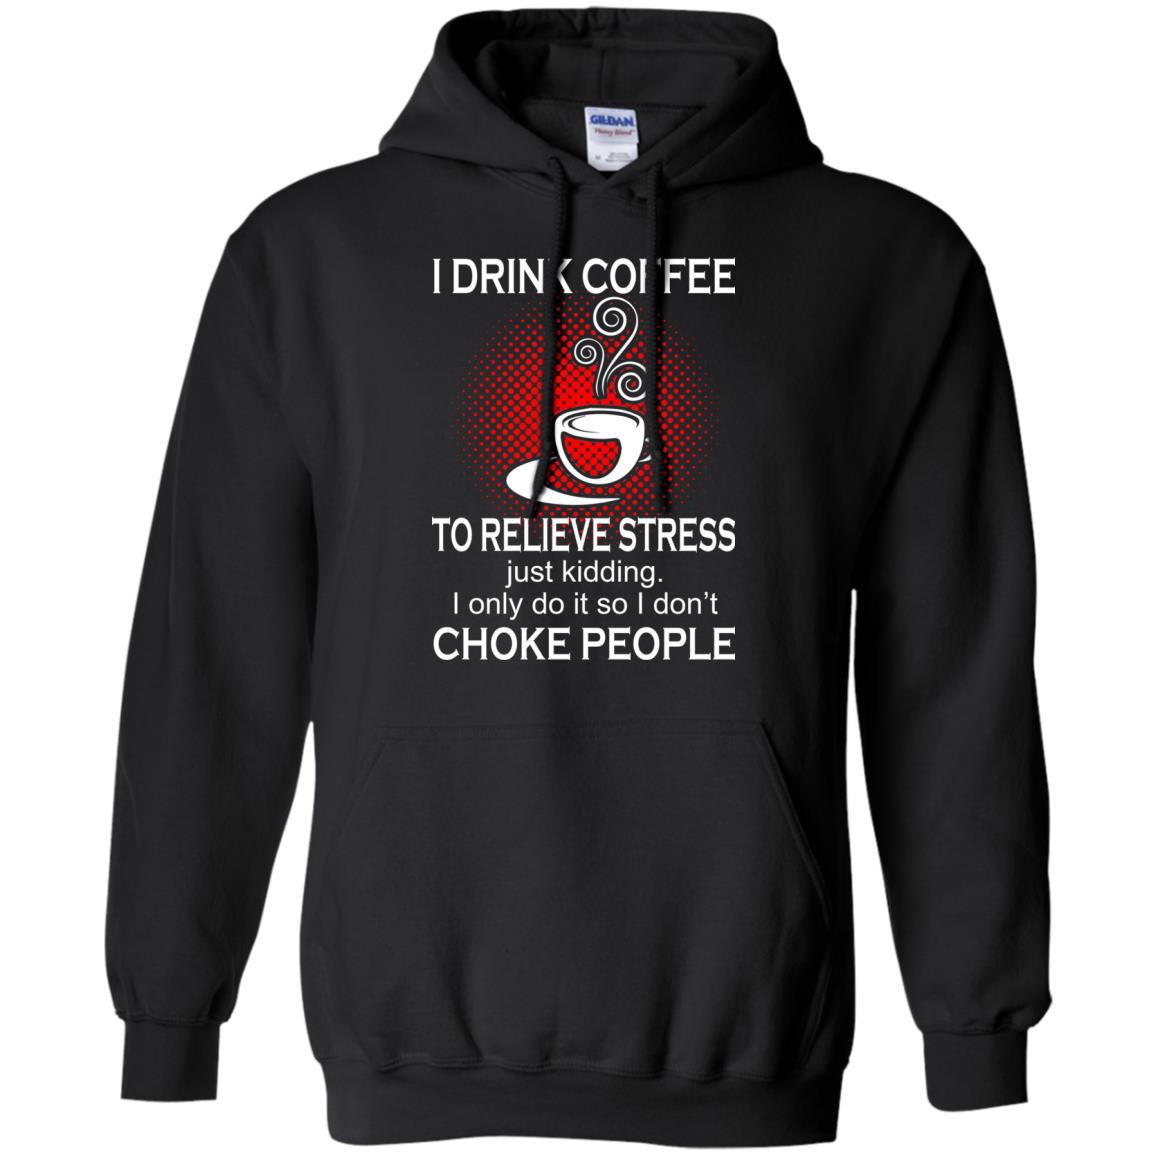 I Drink Coffee To Relieve Stress Shirt, Hoodie, Tank | Allbluetees.com